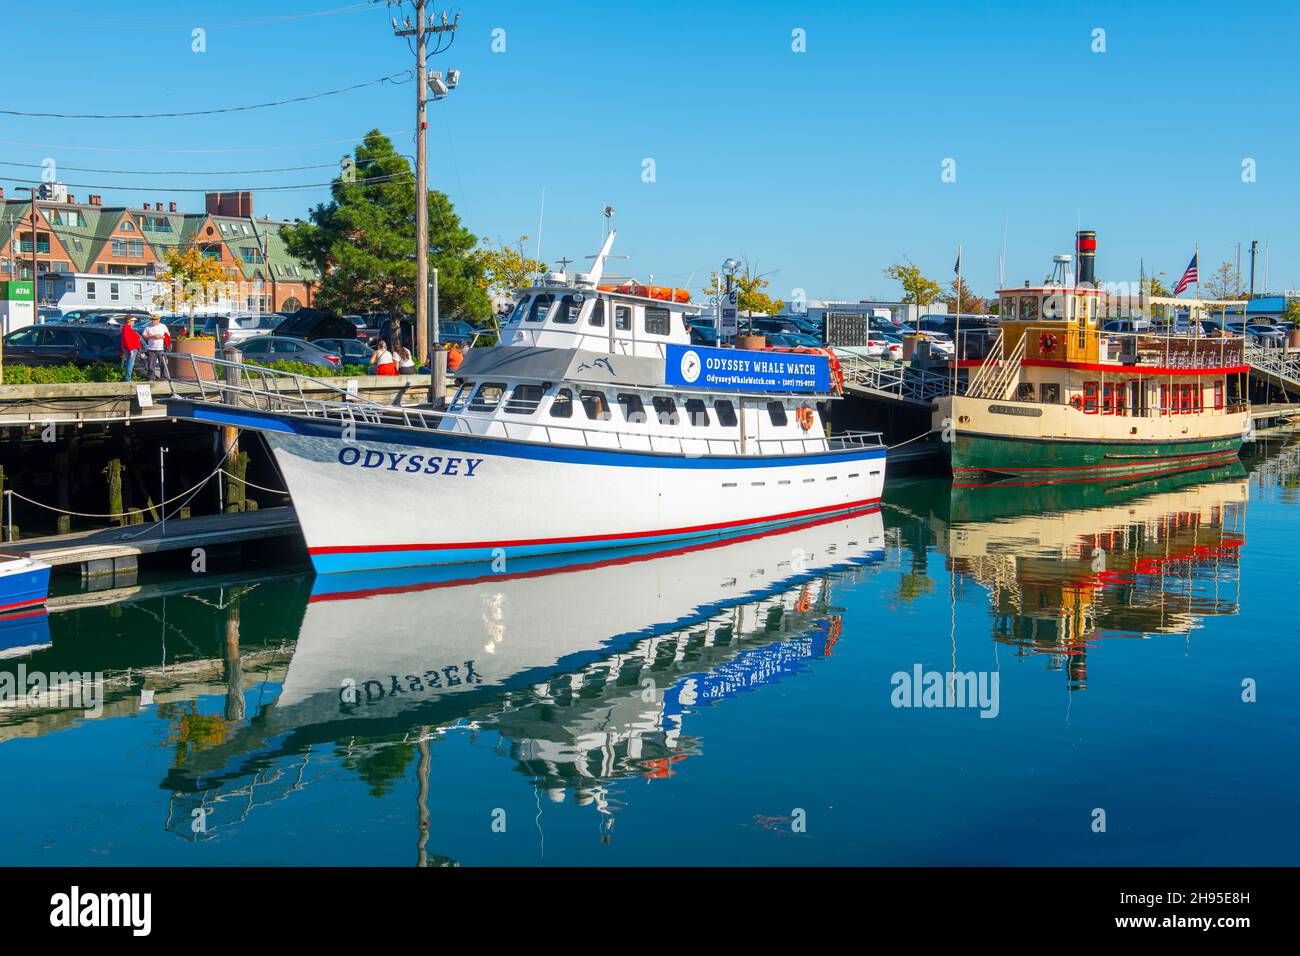 Odyssey Whale Watch ship docked at Long Wharf at Commercial Street in Old Port in city of Portland, Maine ME, USA. Stock Photo